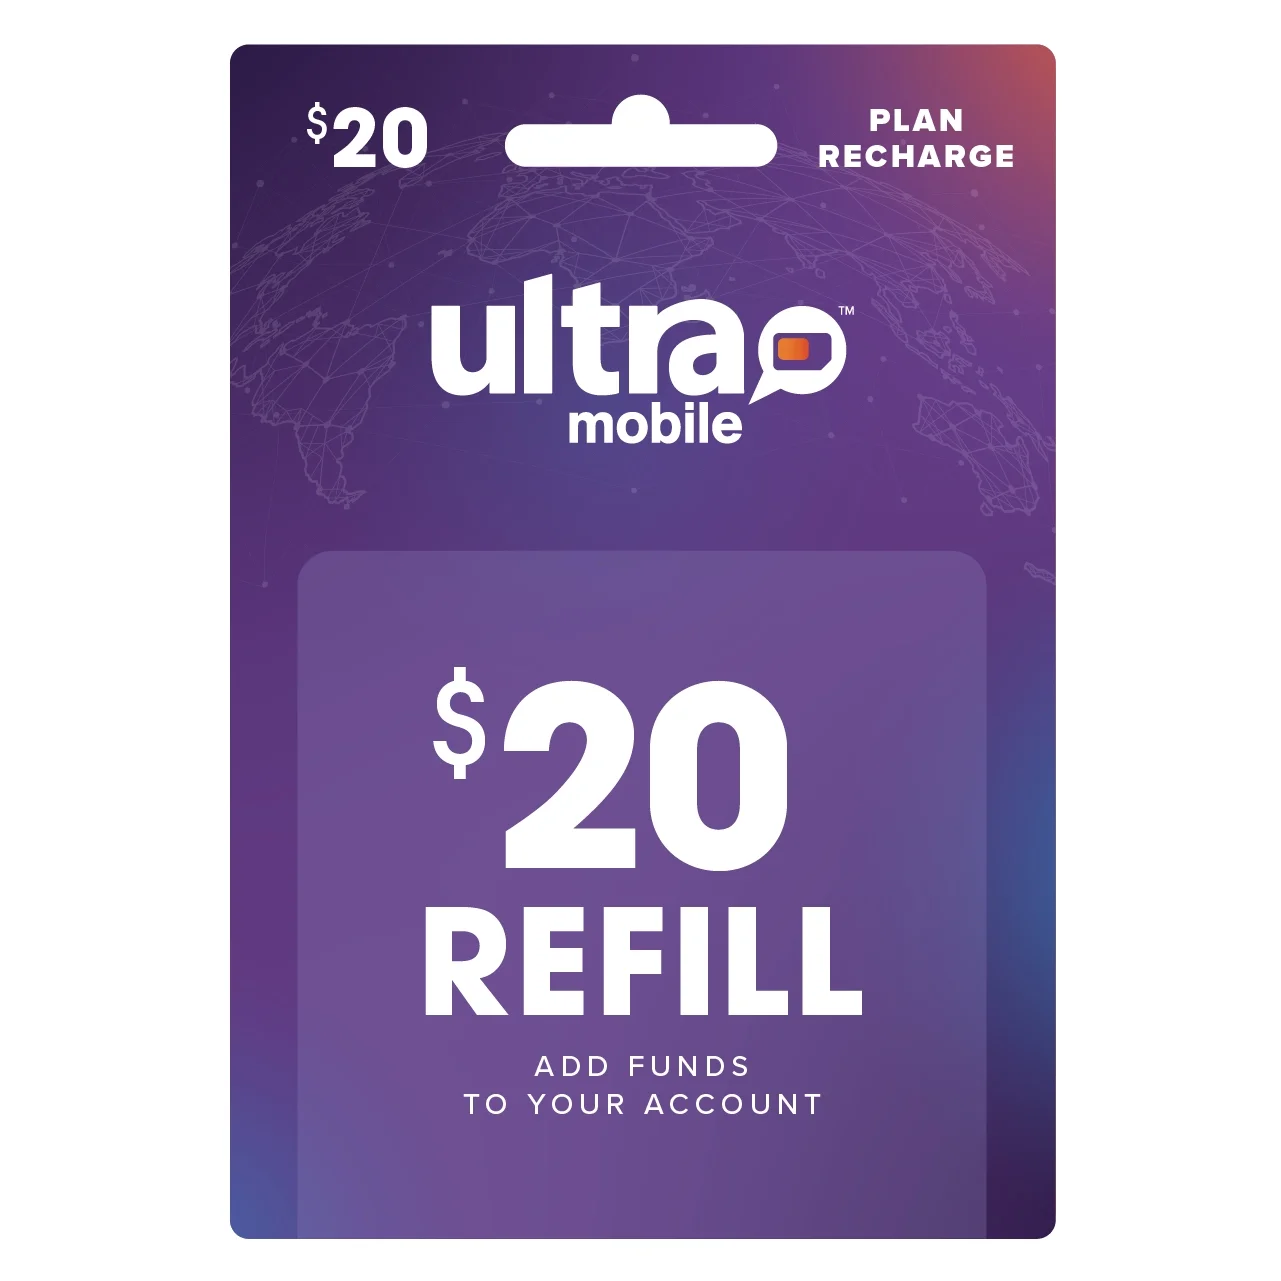 finding-ultra-mobile-sim-cards-essential-tips